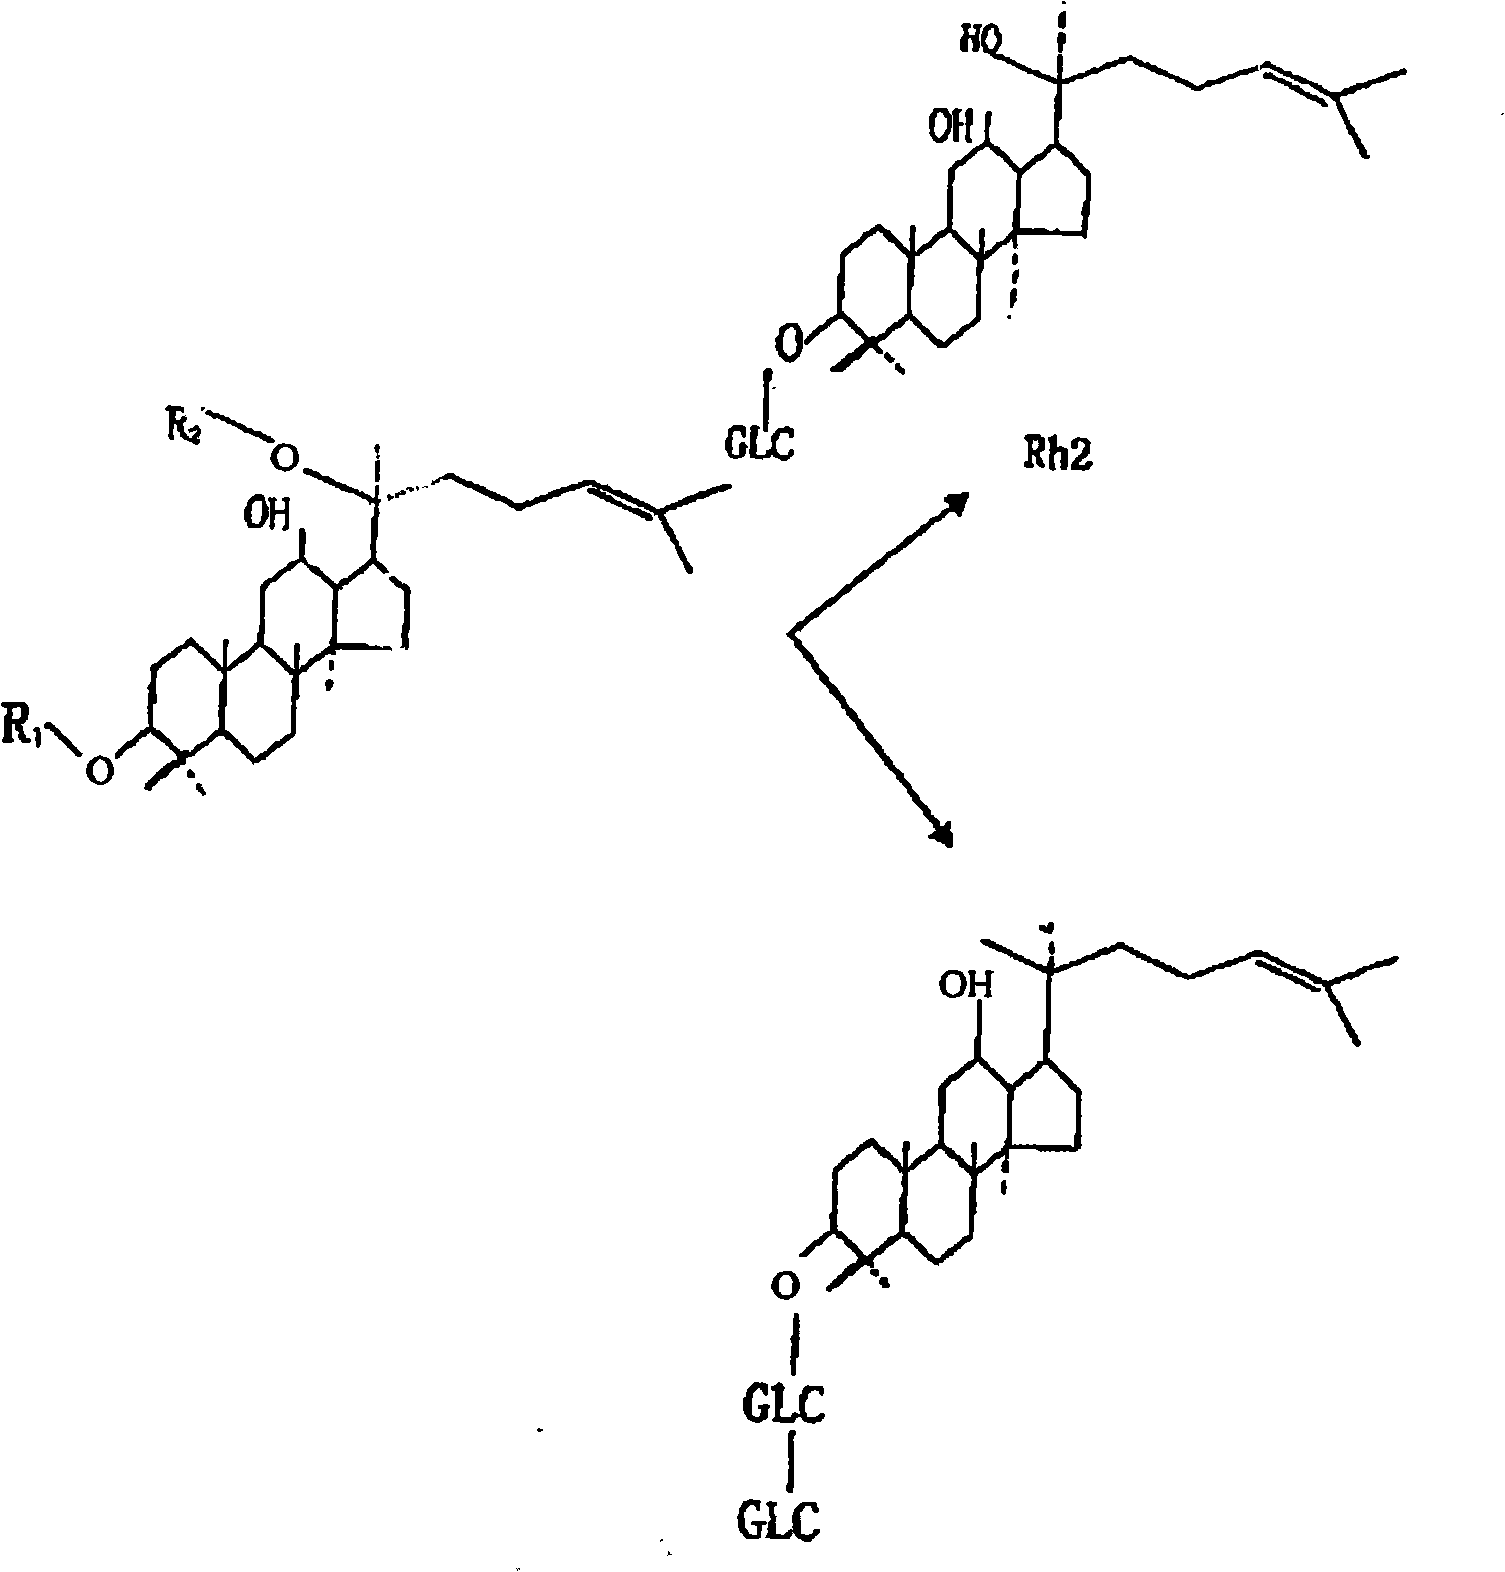 Process for preparing ginsenosides Rh2 and Rh3 from stems and leaves of pseudoginseng root